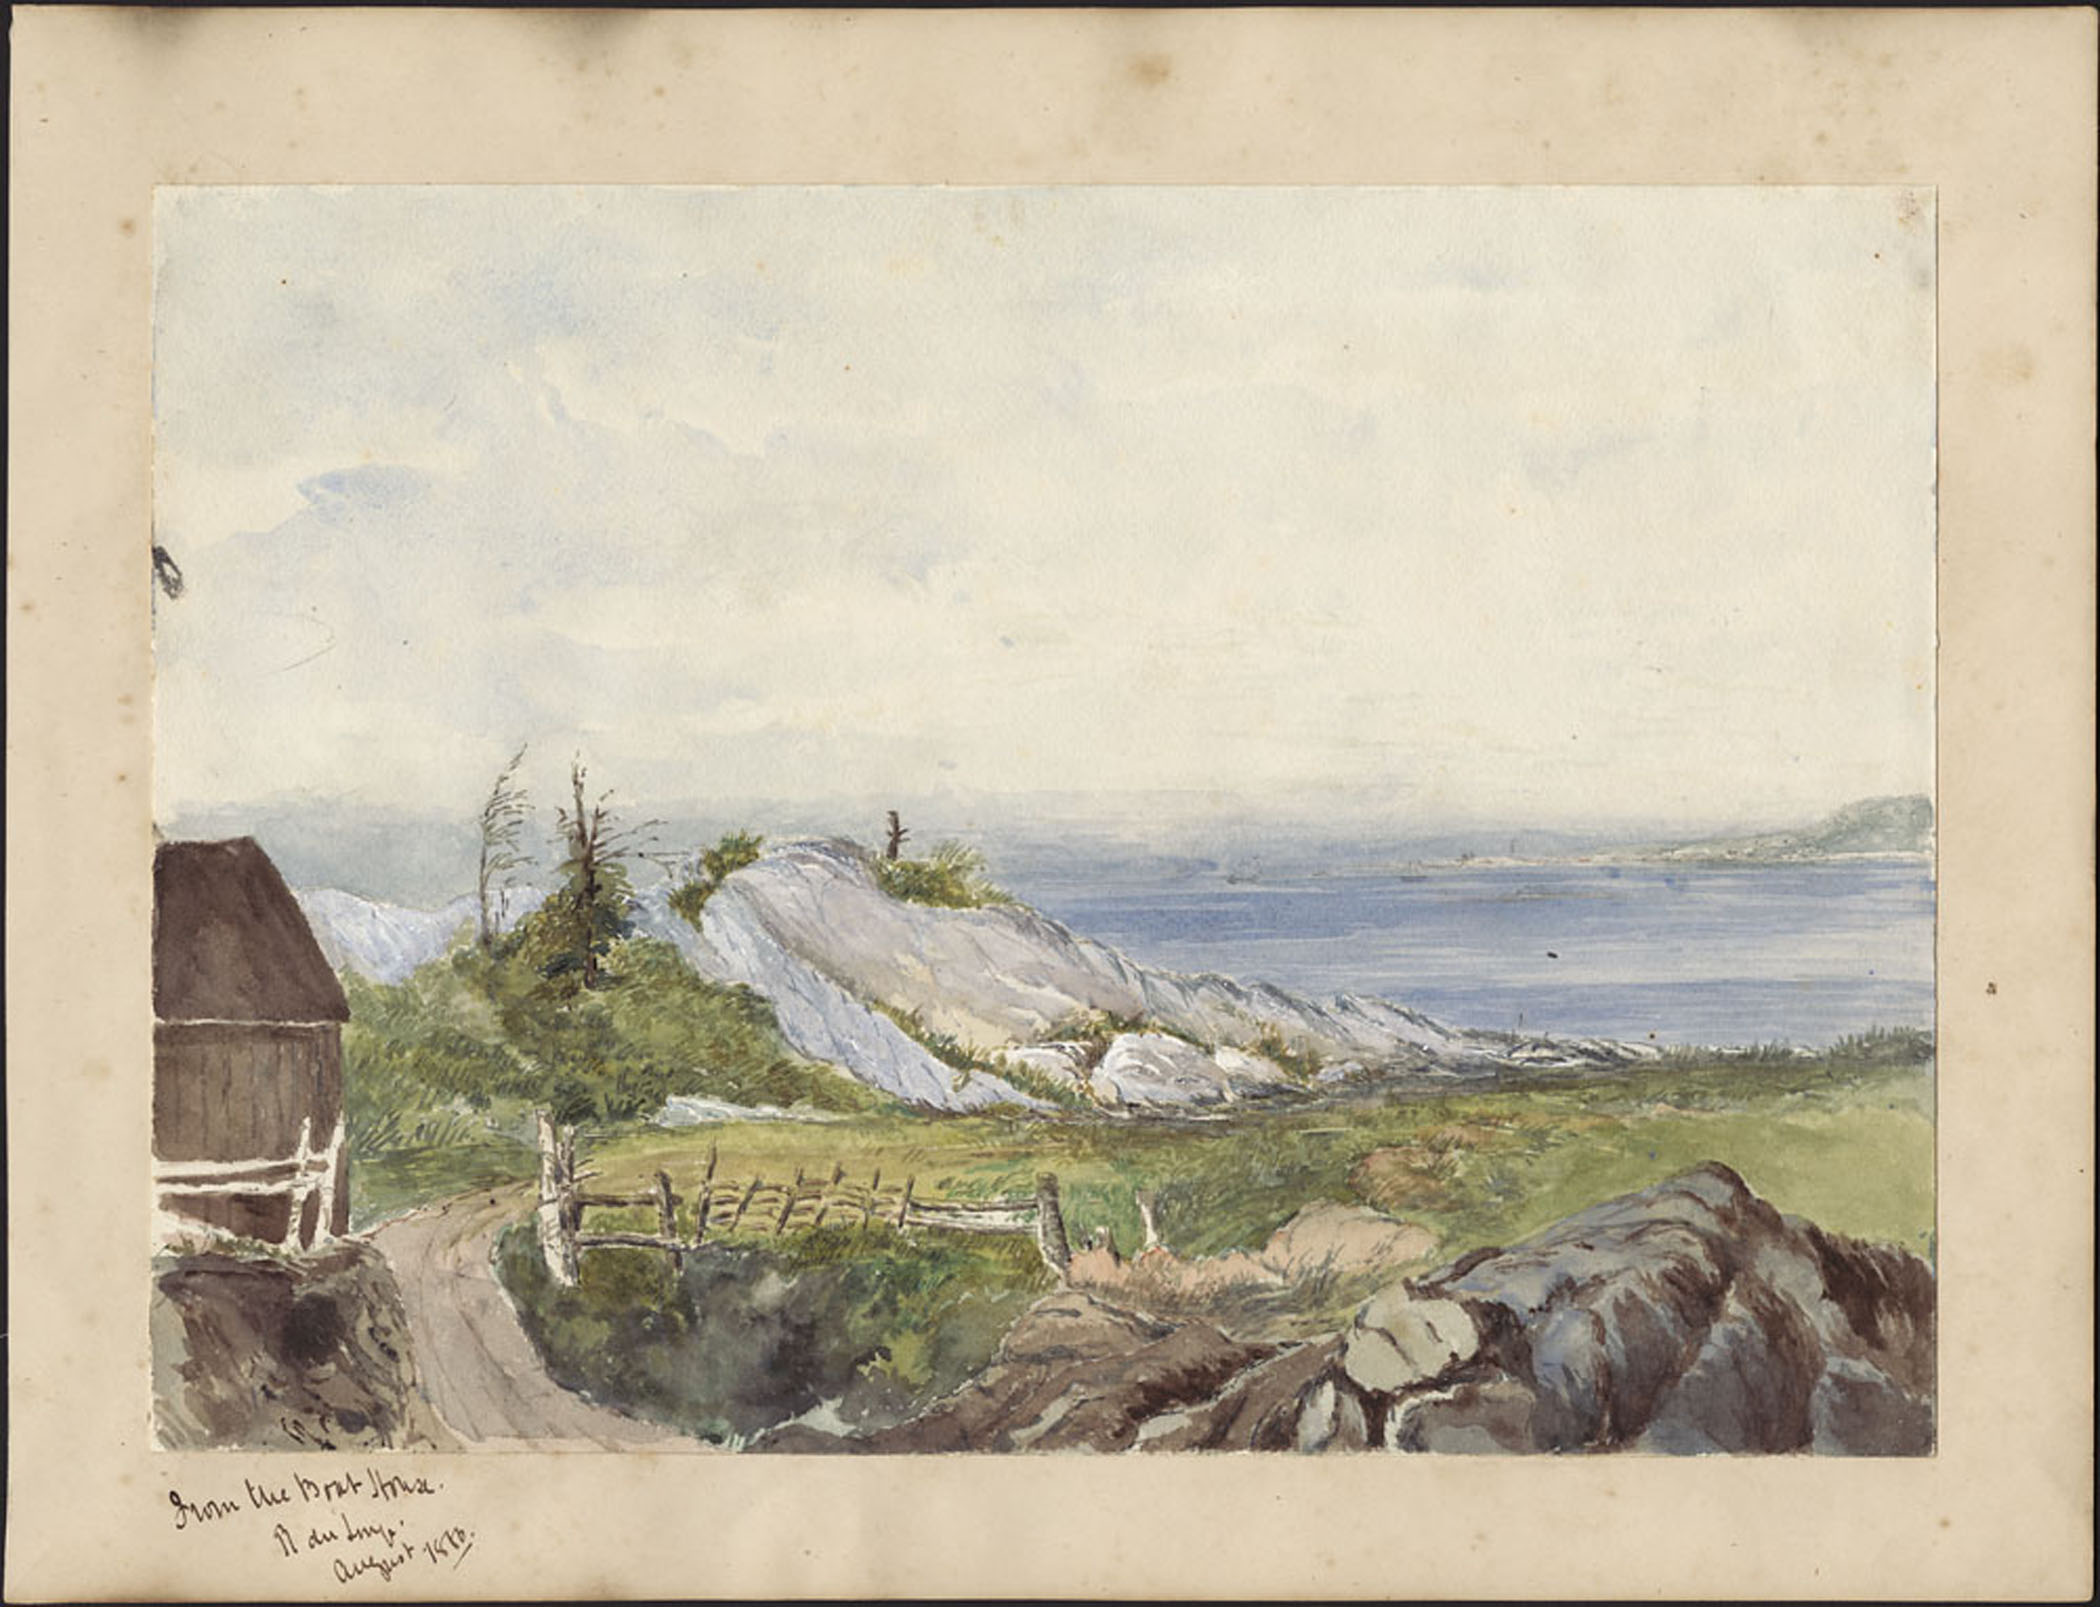 Watercolour painting of a river scene depicting part of a wooden building, a pathway, rocky outcrops, a wooden fence, and the Saint Lawrence River in the distance.